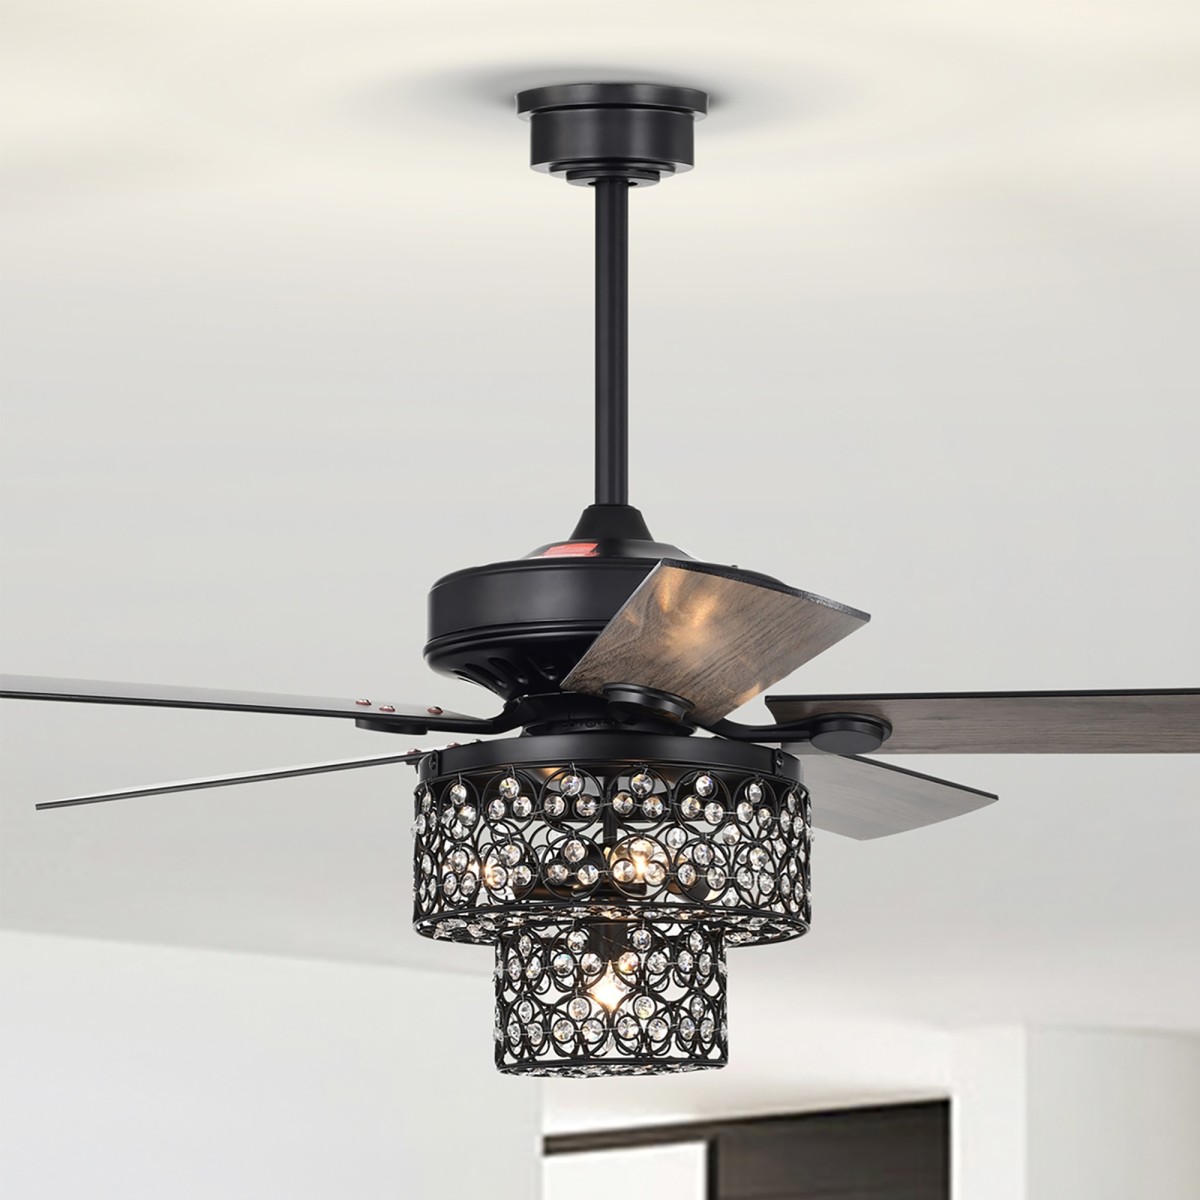 Hasna 52 in. 4-Light Indoor Matte Black Finish Ceiling Fan with Light Kit and Remote